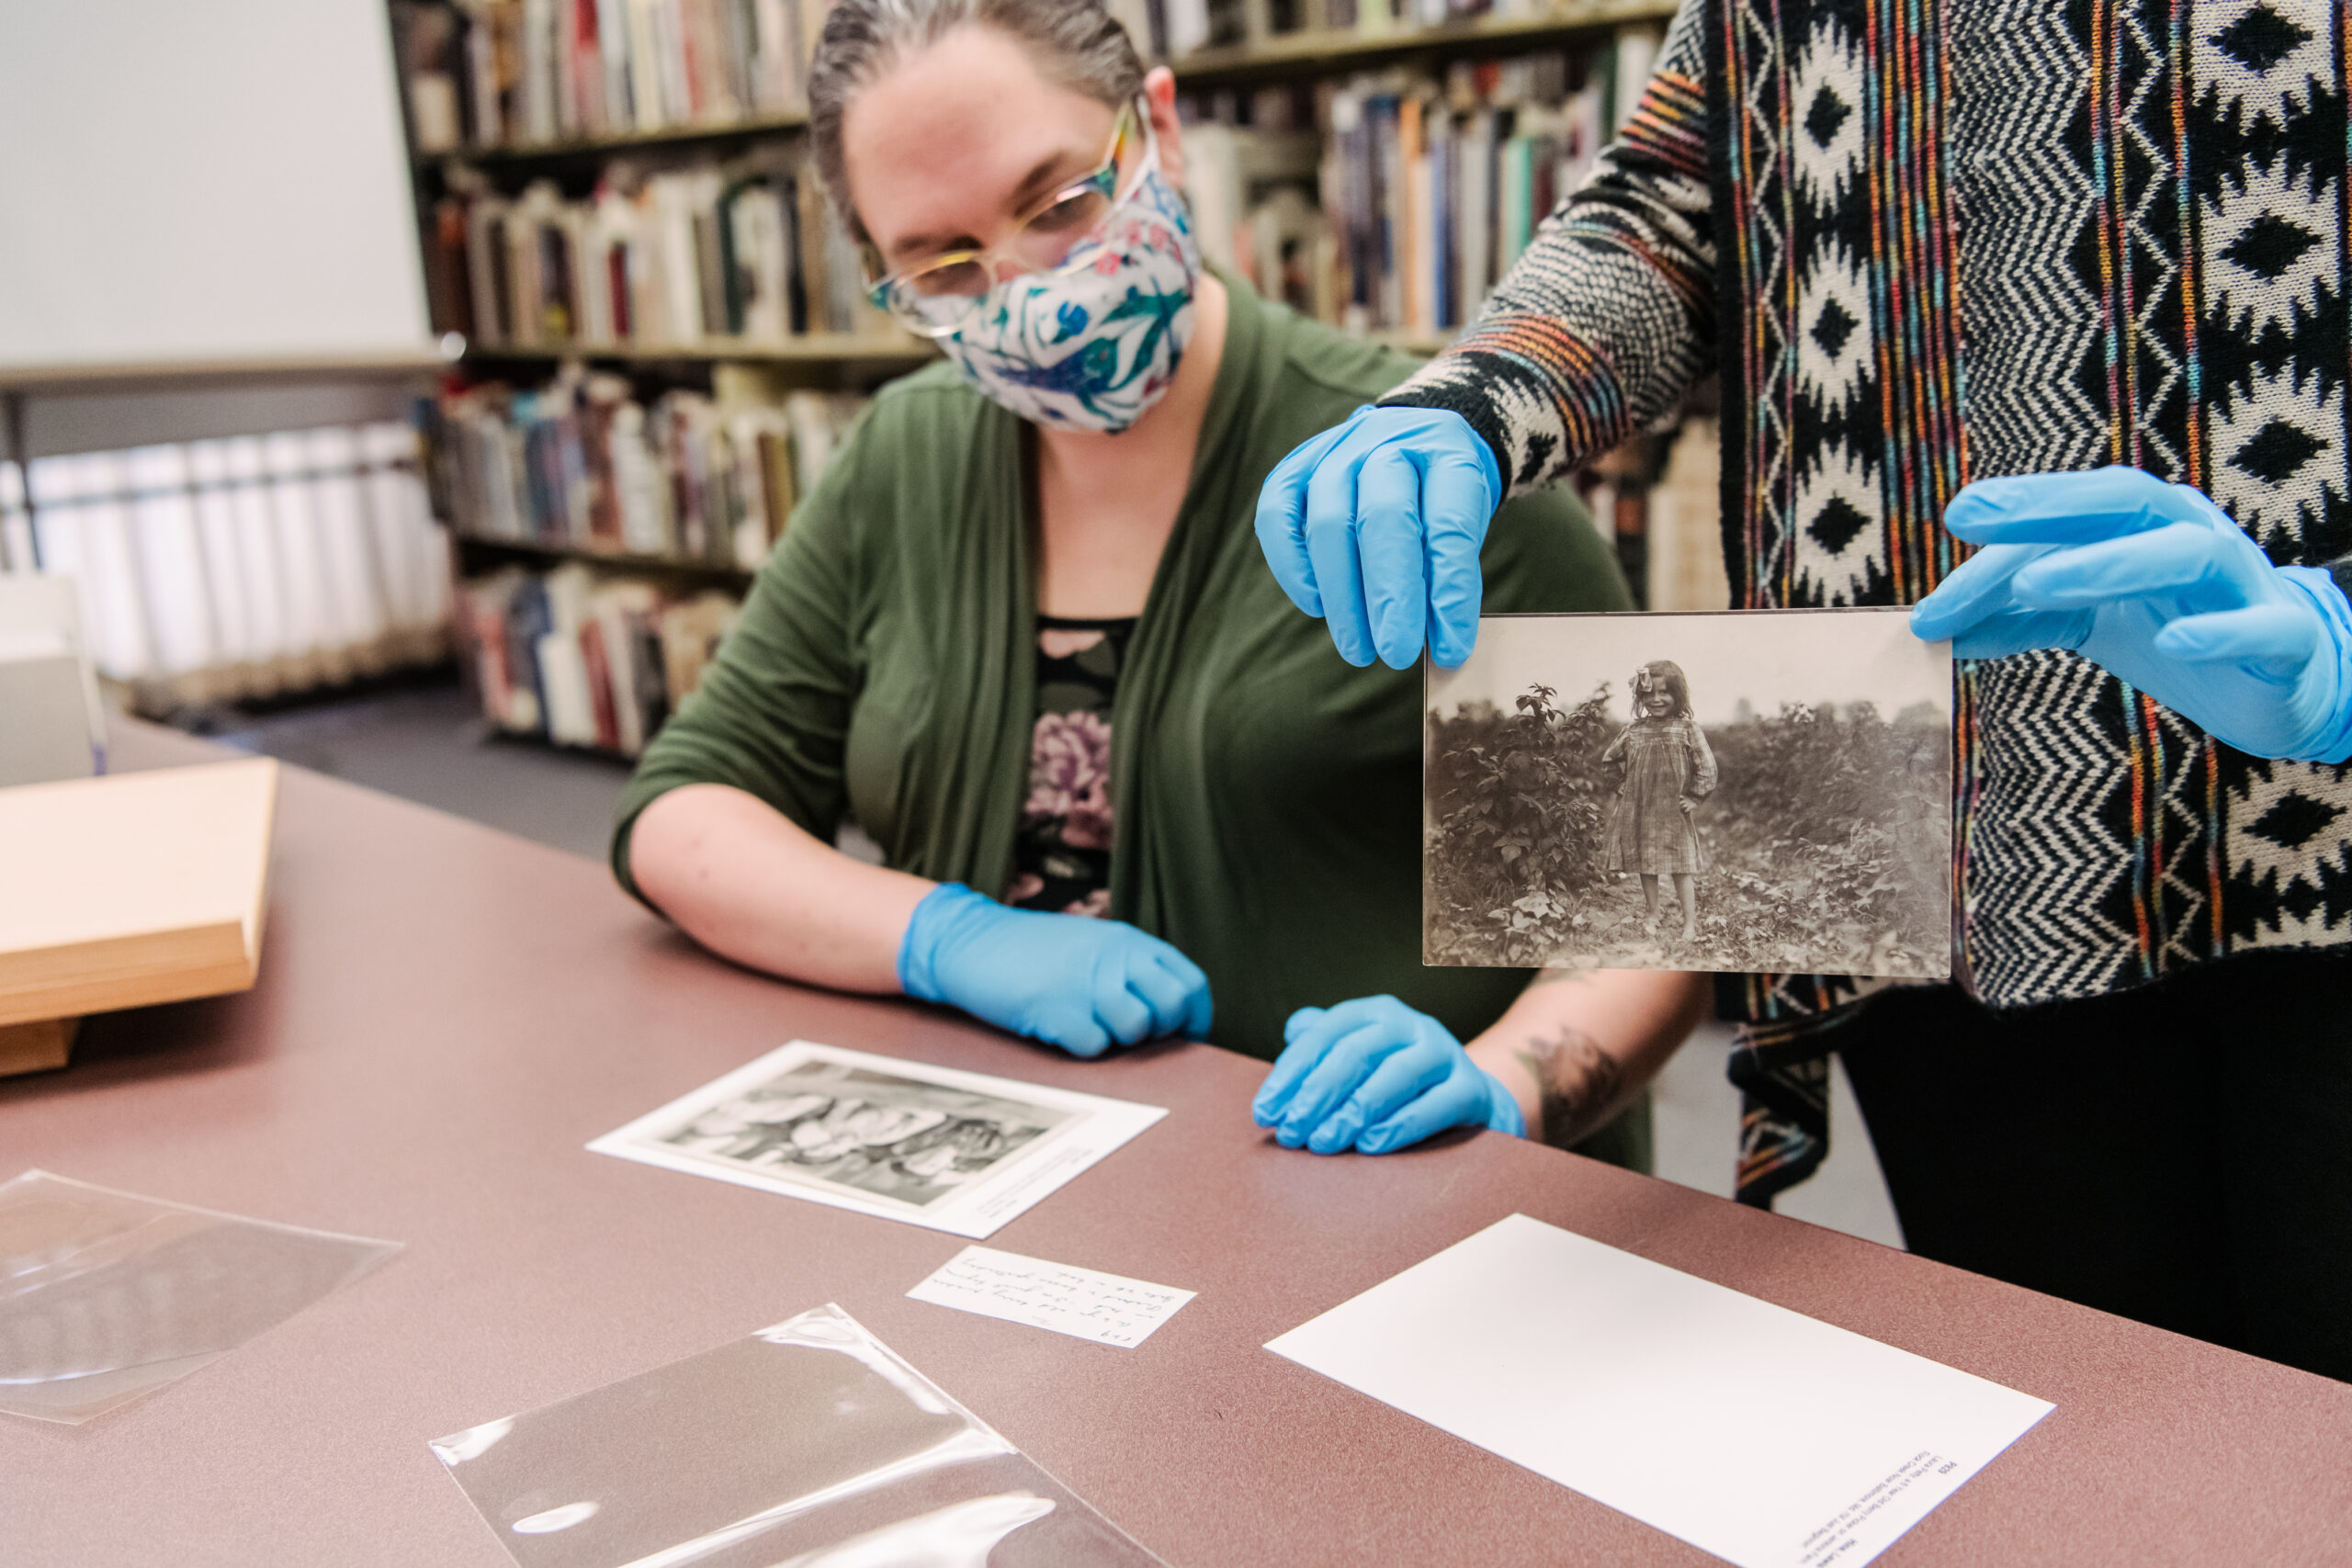 Handle with care—students help digitize and rehouse thousands of historical photos